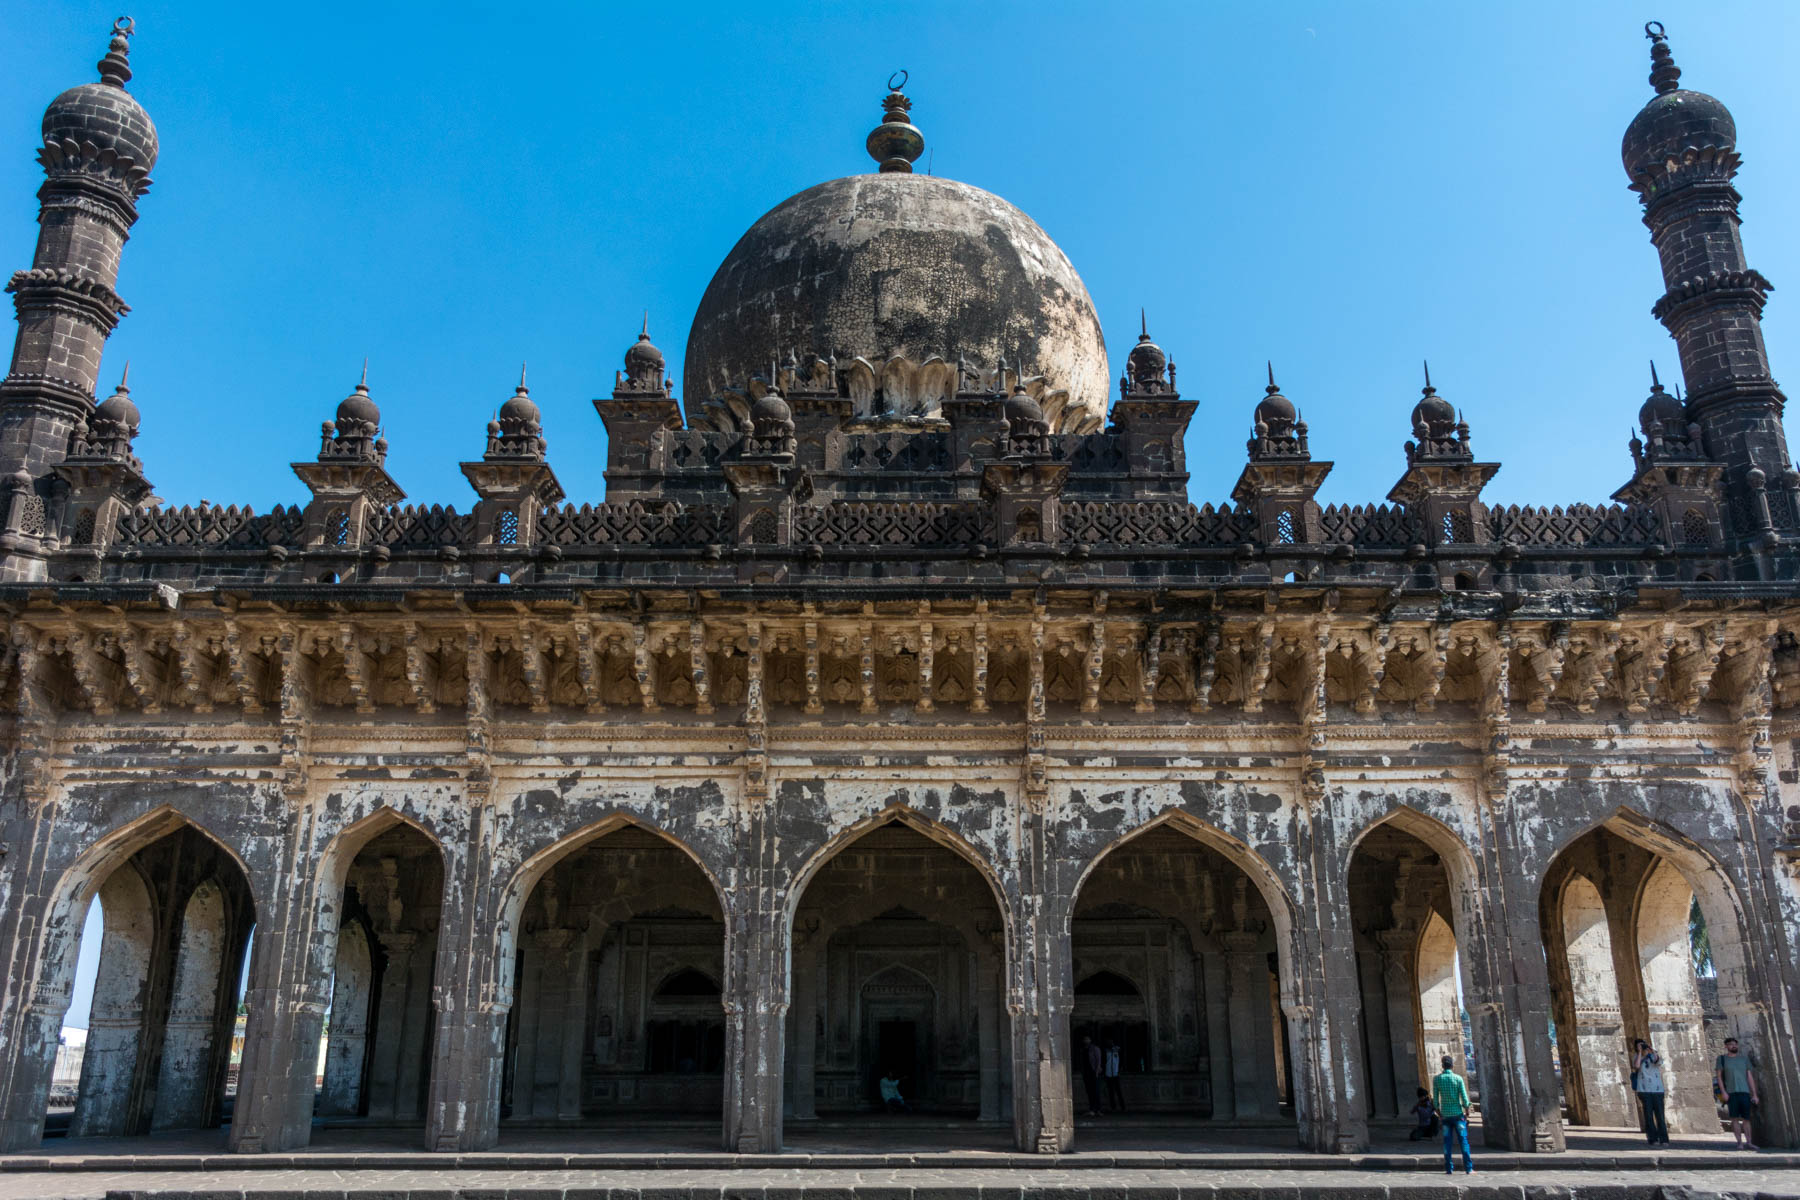 Off the beaten track places to visit in Karnataka, India - A tomb at Ibrahim Rauza in Bijapur, India - Lost With Purpose